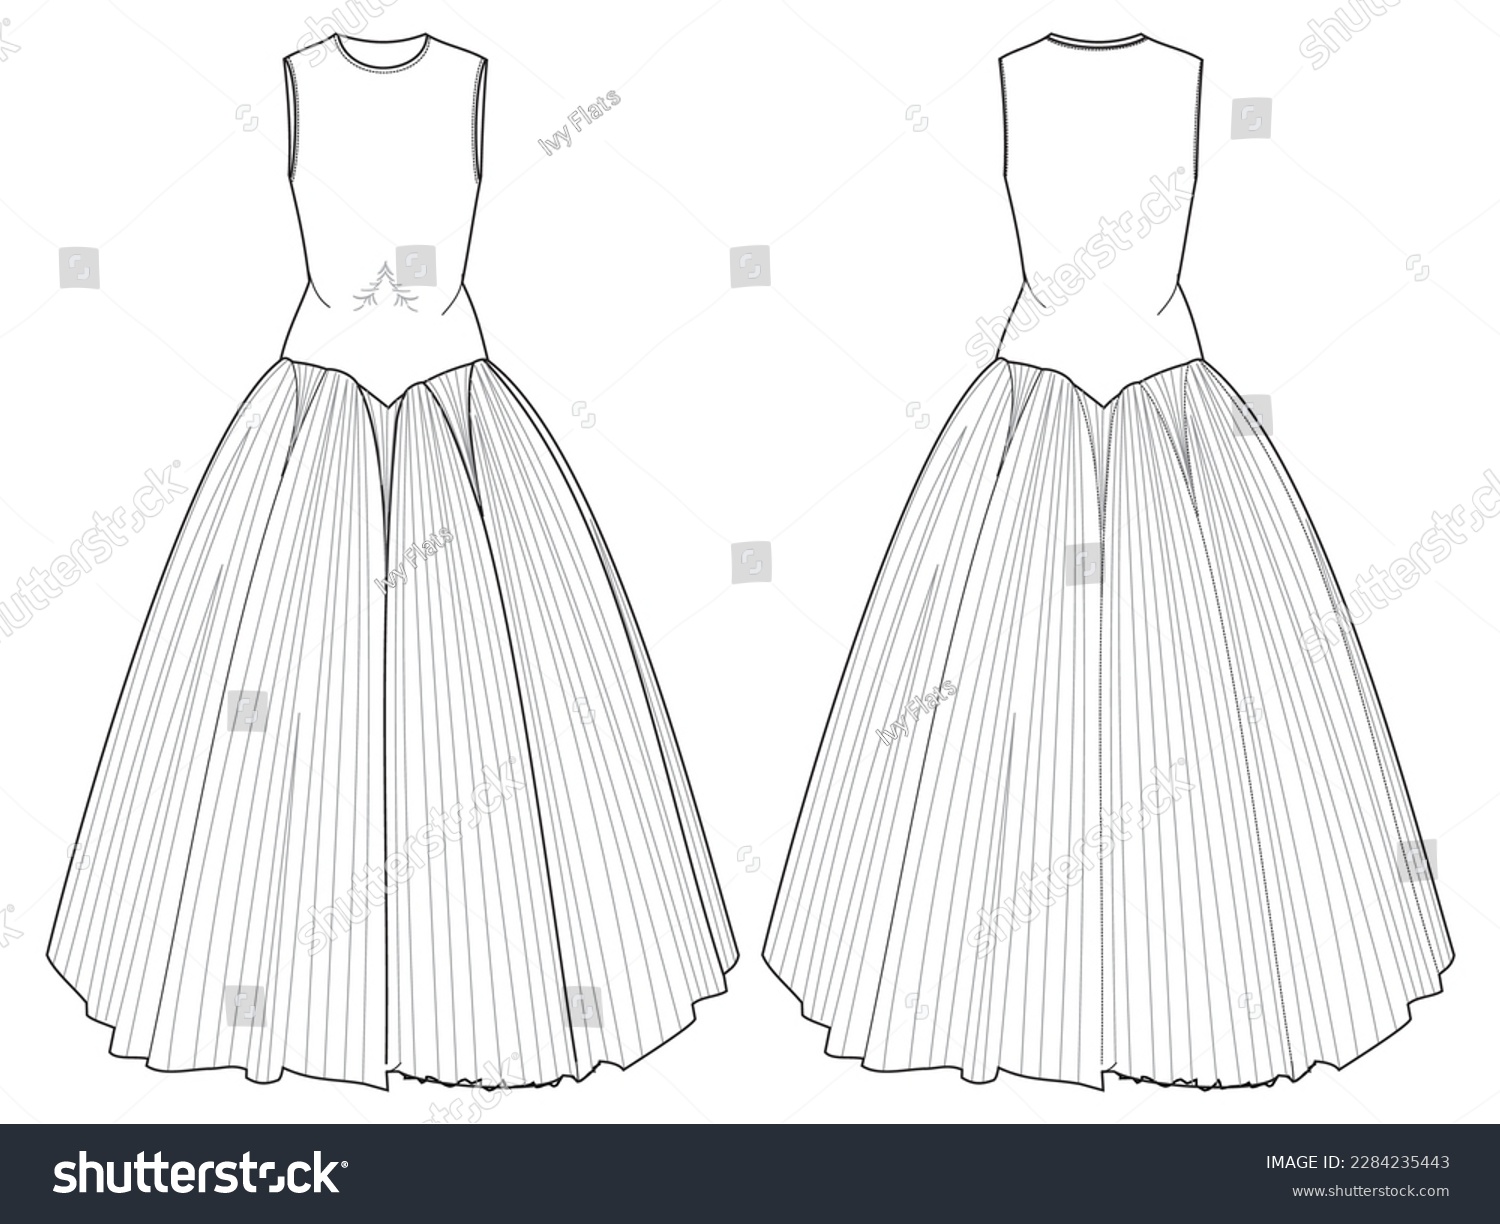 SVG of Women A line bridal dress design flat sketch fashion illustration with front and back view, Sleeveless Round neck bridal dress flat sketch cad drawing template. Flared pleated skirt wedding dress svg